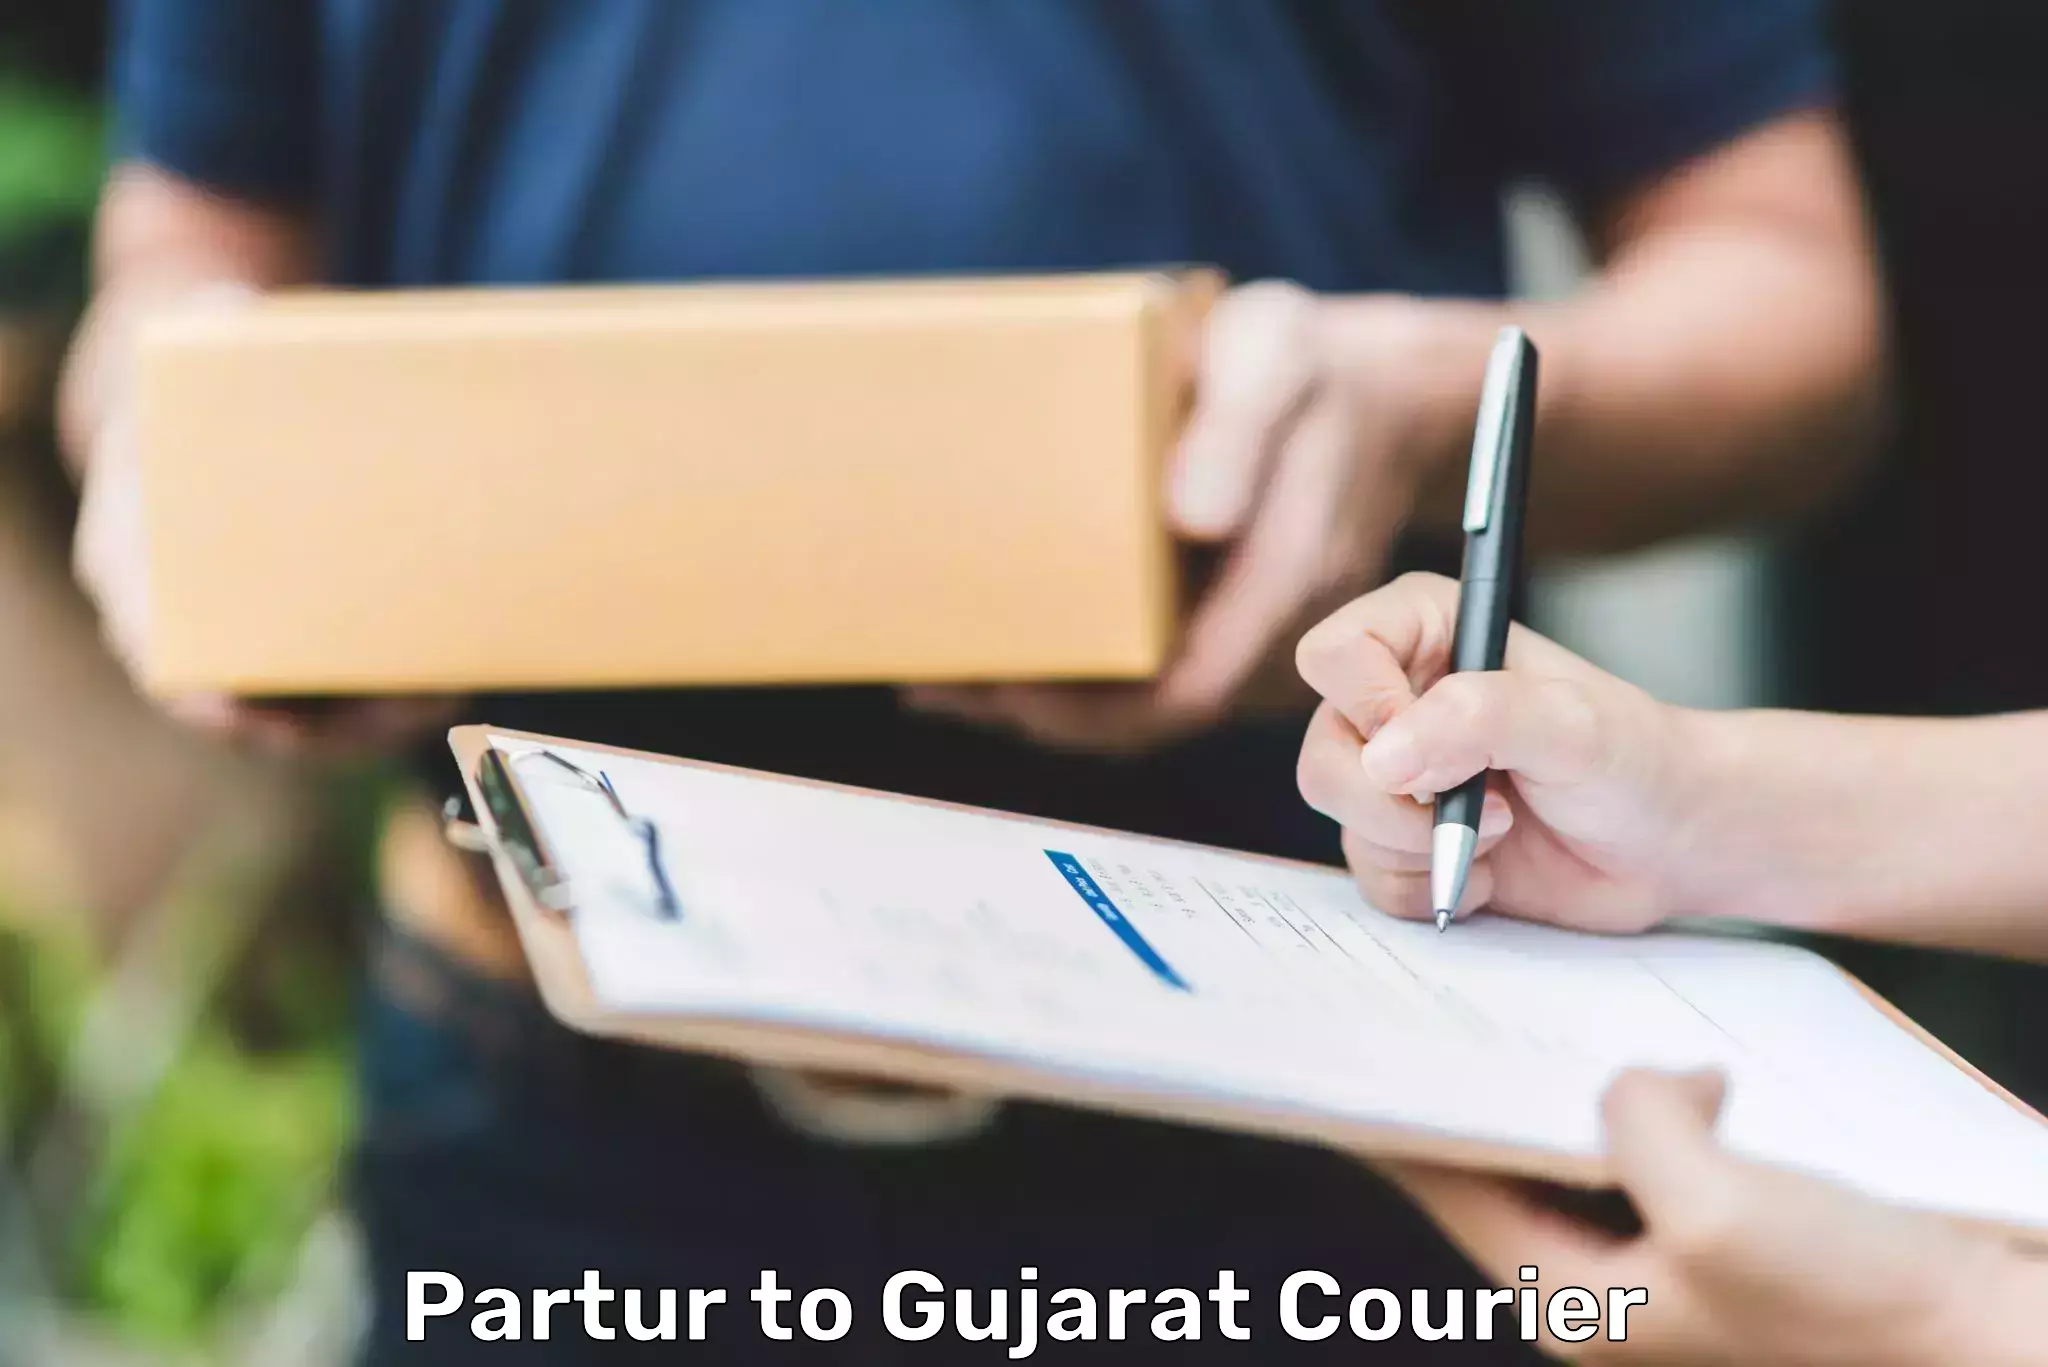 Global shipping networks Partur to Gujarat